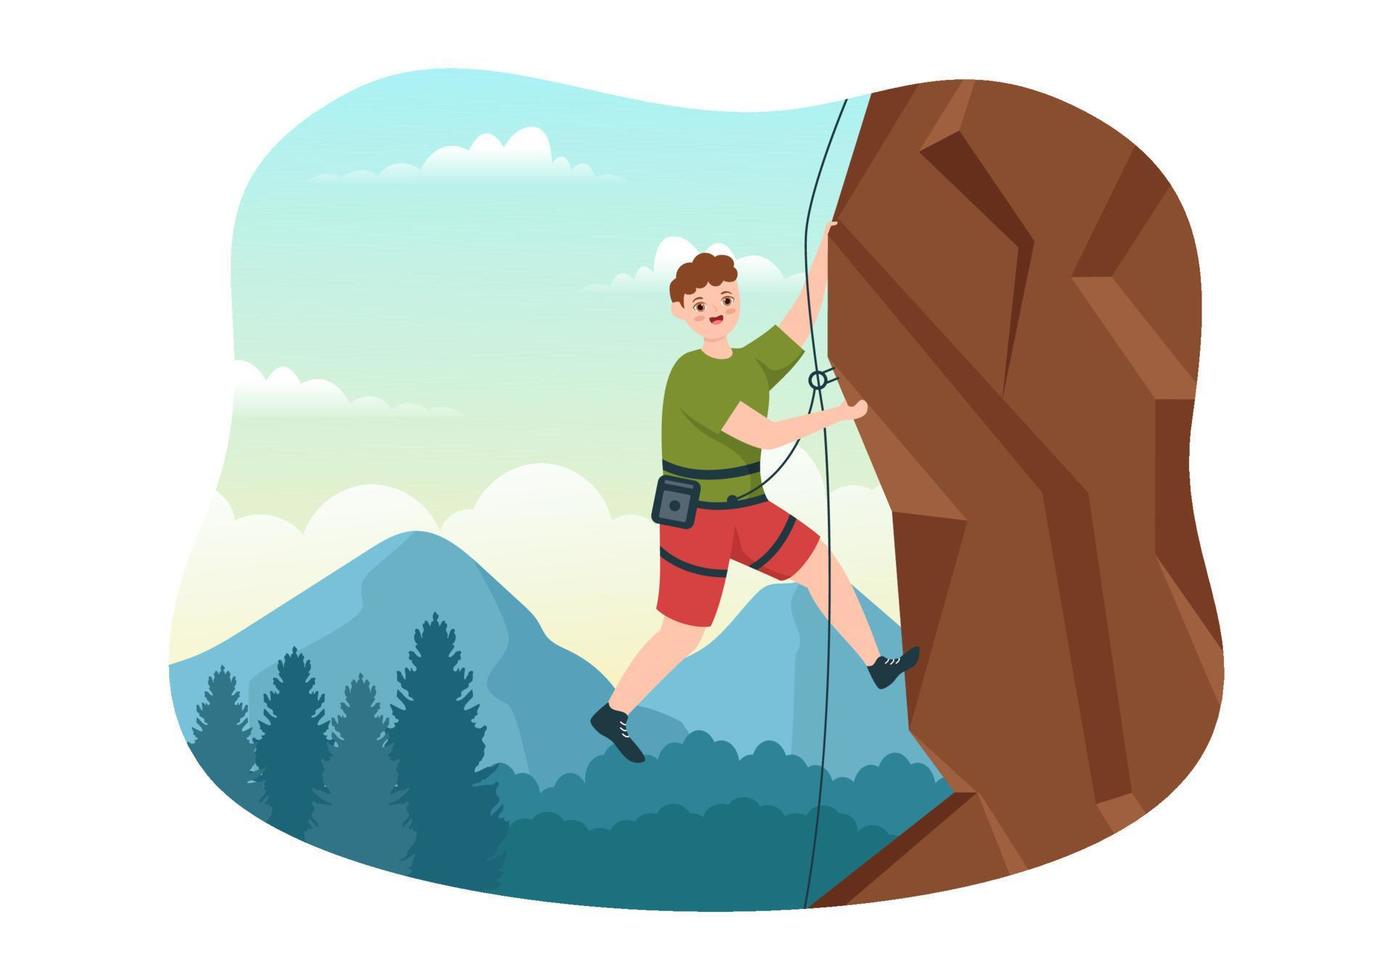 Cliff Climbing Illustration with Climber Climb Rock Wall or Mountain Cliffs and Extreme Activity Sport in Flat Cartoon Hand Drawn Template vector